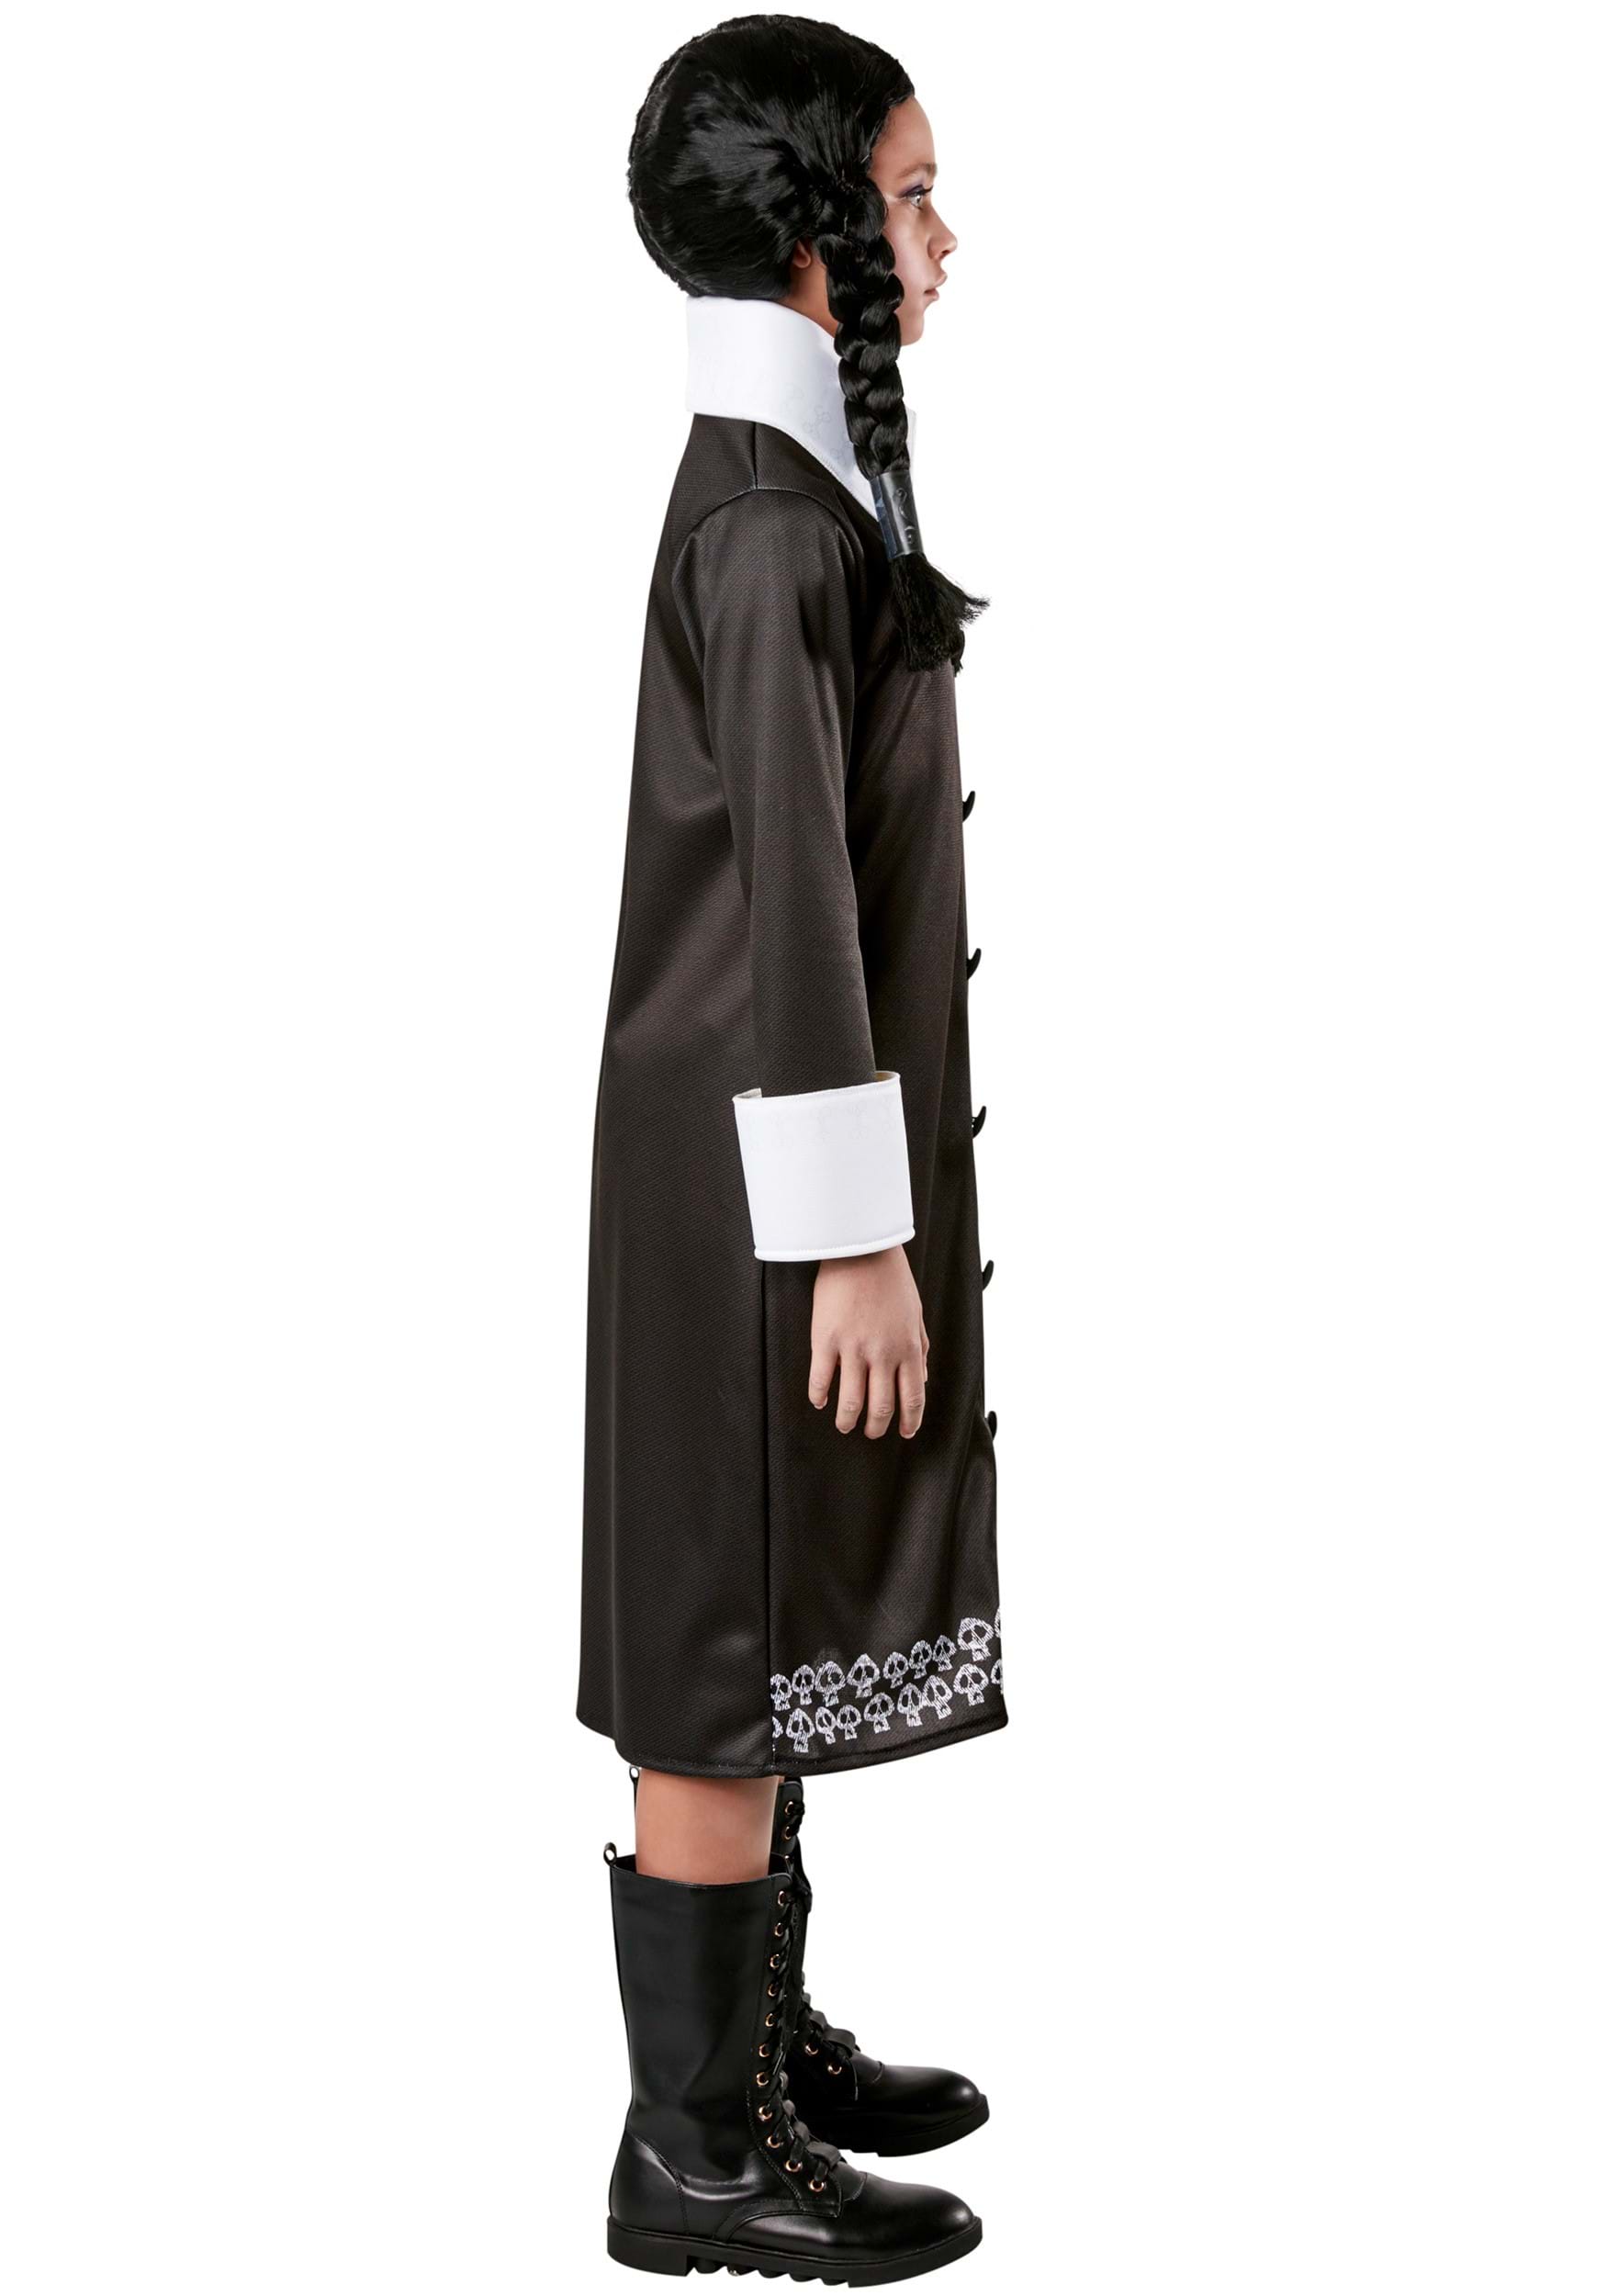 The Addams Family 2 Wednesday Girl's Costume